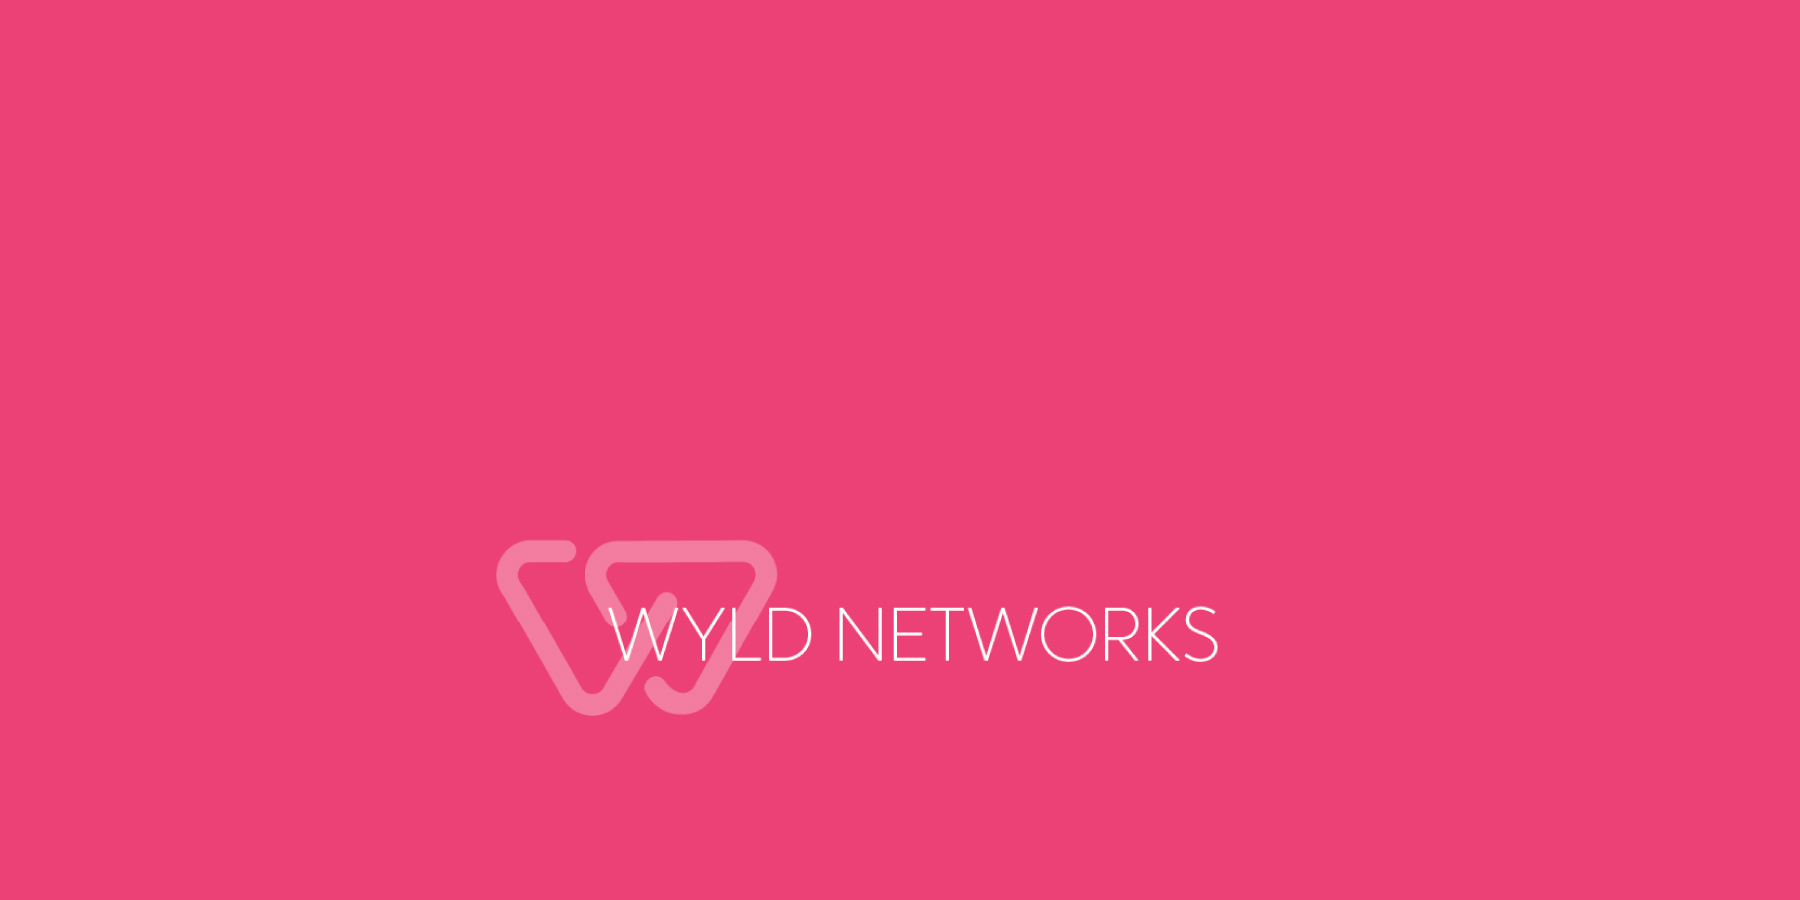 Wyld Networks signs agreement with ConocoPhillips